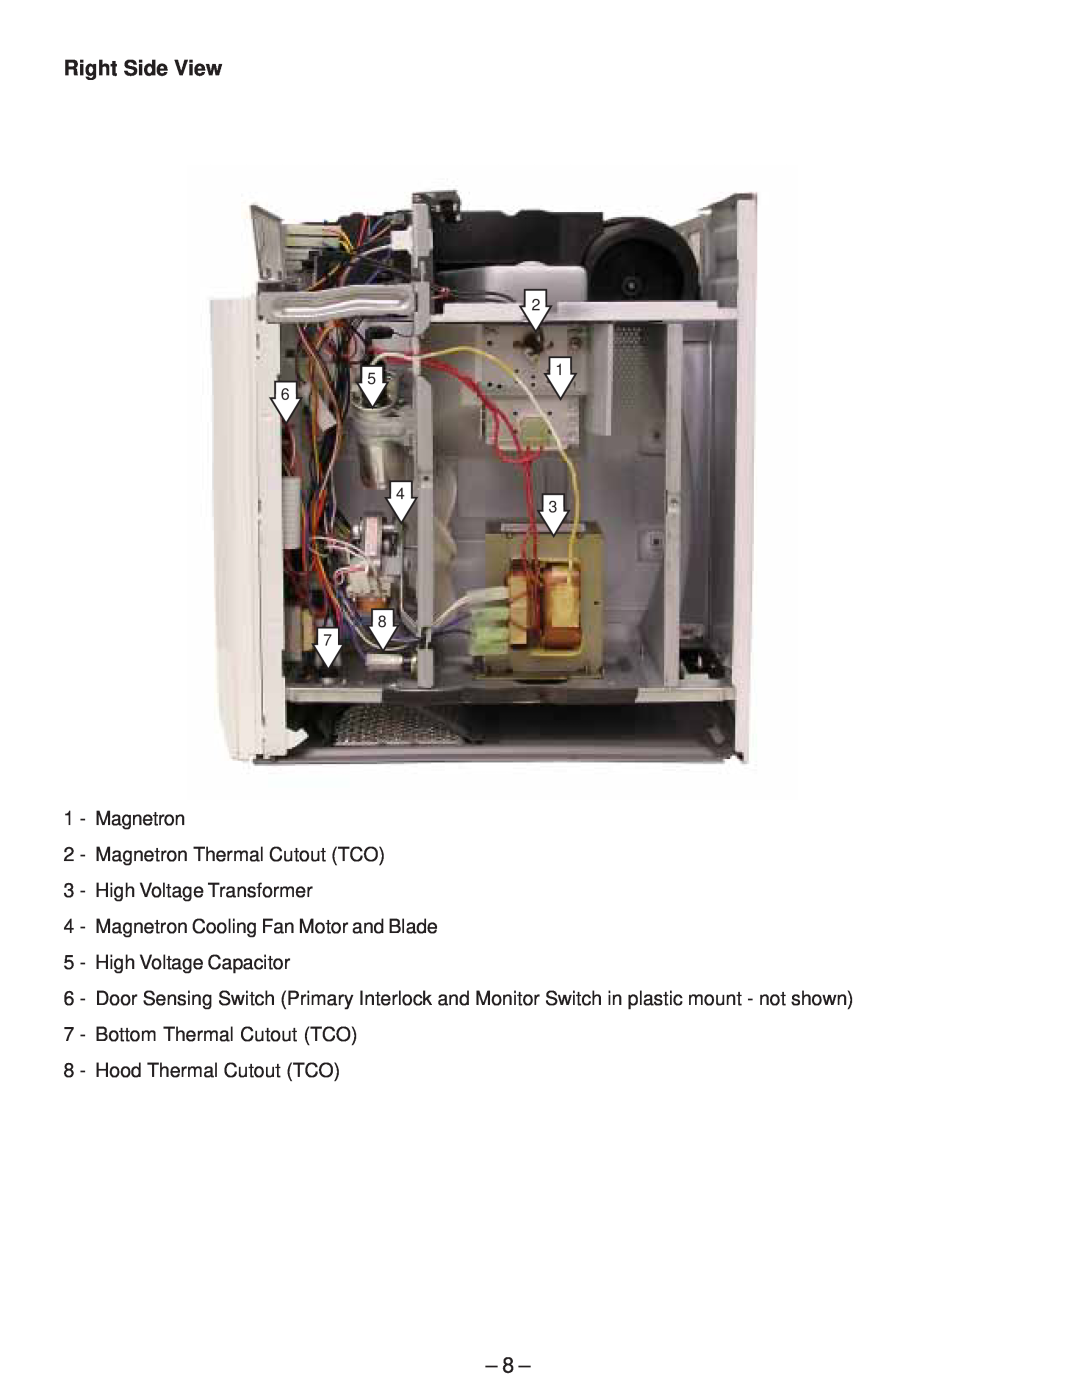 GE JVM2070_H manual Right Side View, Magnetron 2 - Magnetron Thermal Cutout TCO, High Voltage Transformer 